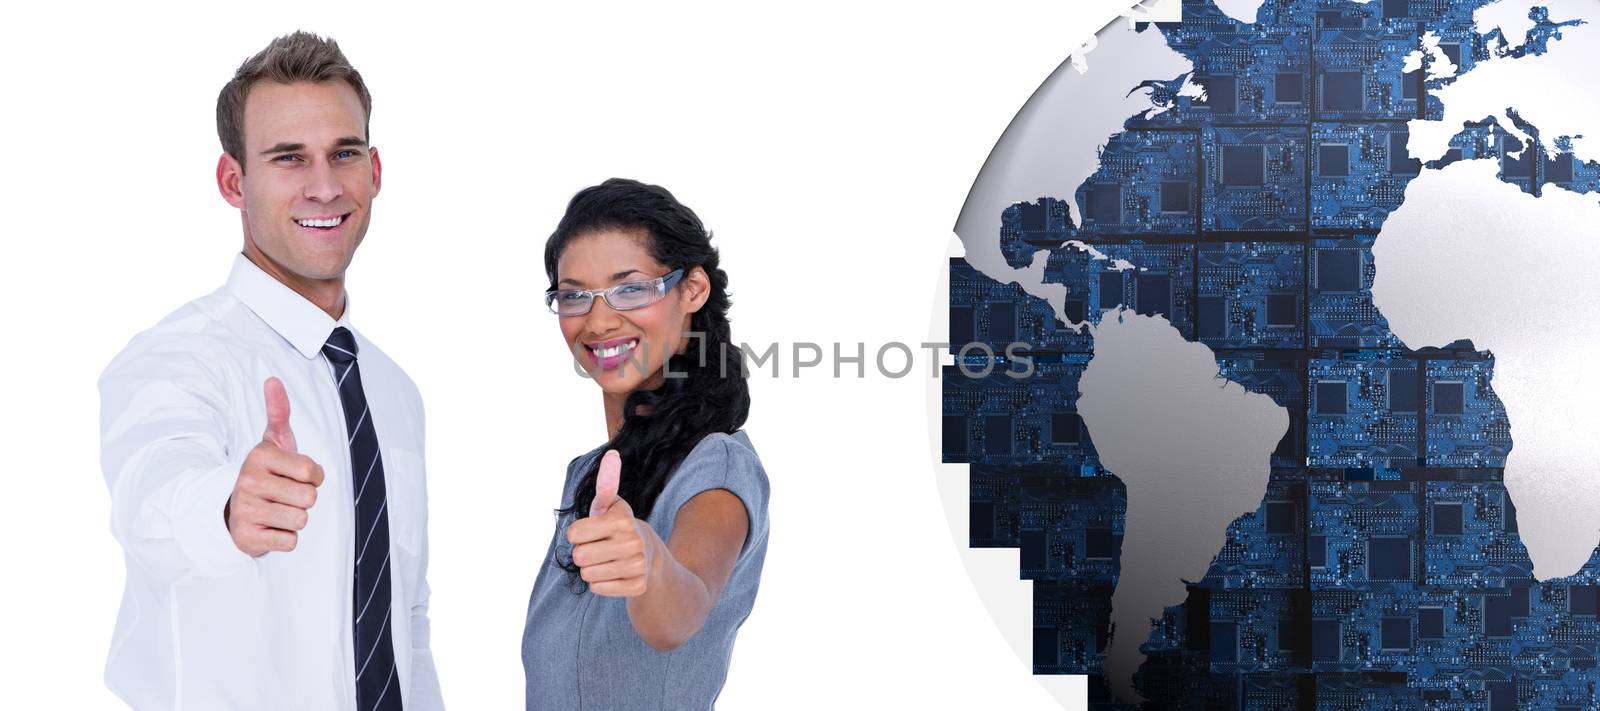 Happy business people looking at camera with thumbs up  against circuit board earth